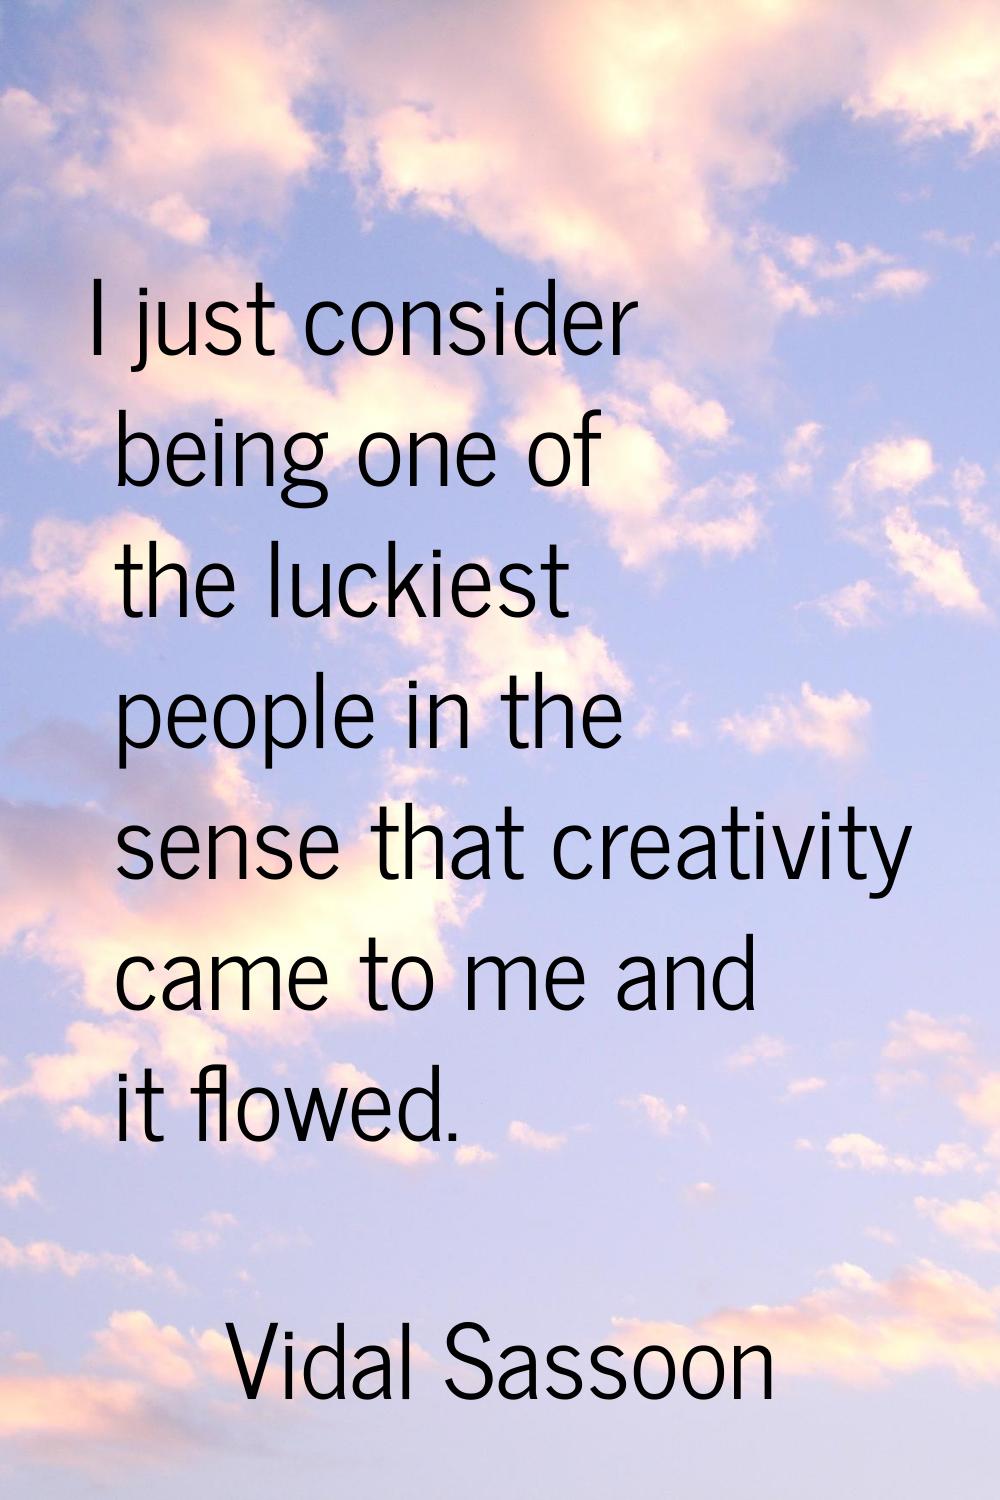 I just consider being one of the luckiest people in the sense that creativity came to me and it flo